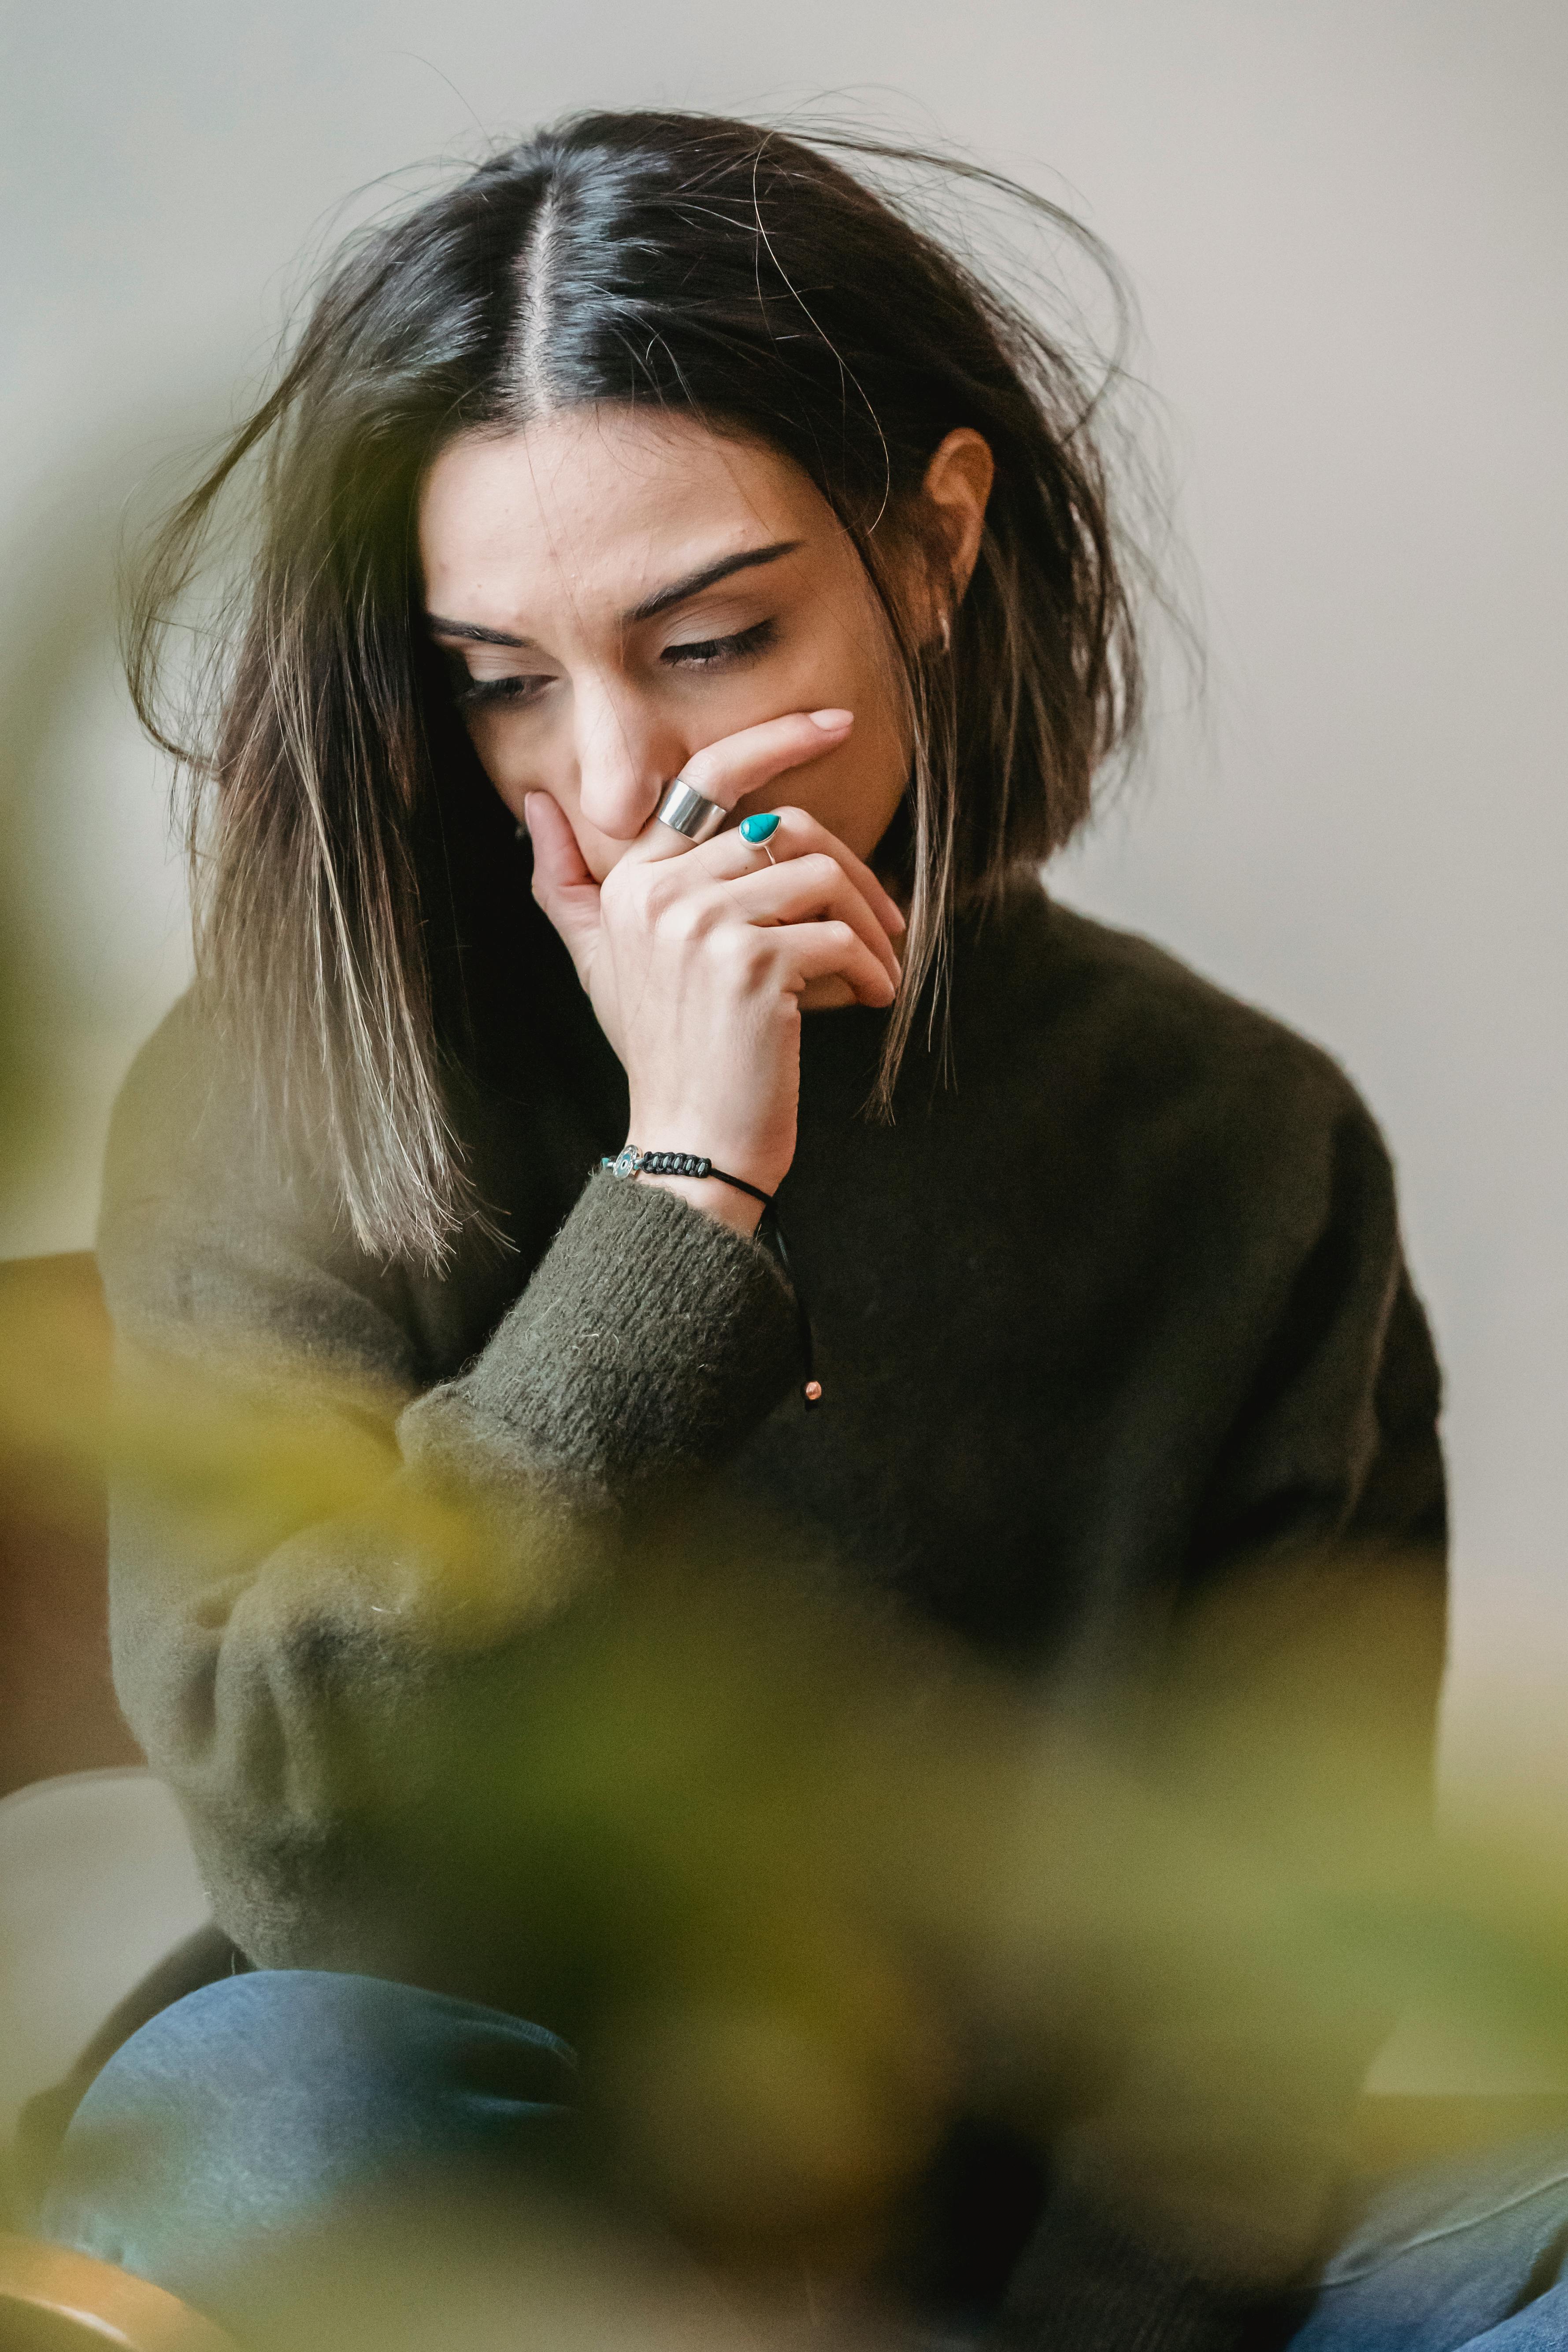 An upset woman with her hand on her mouth | Source: Pexels